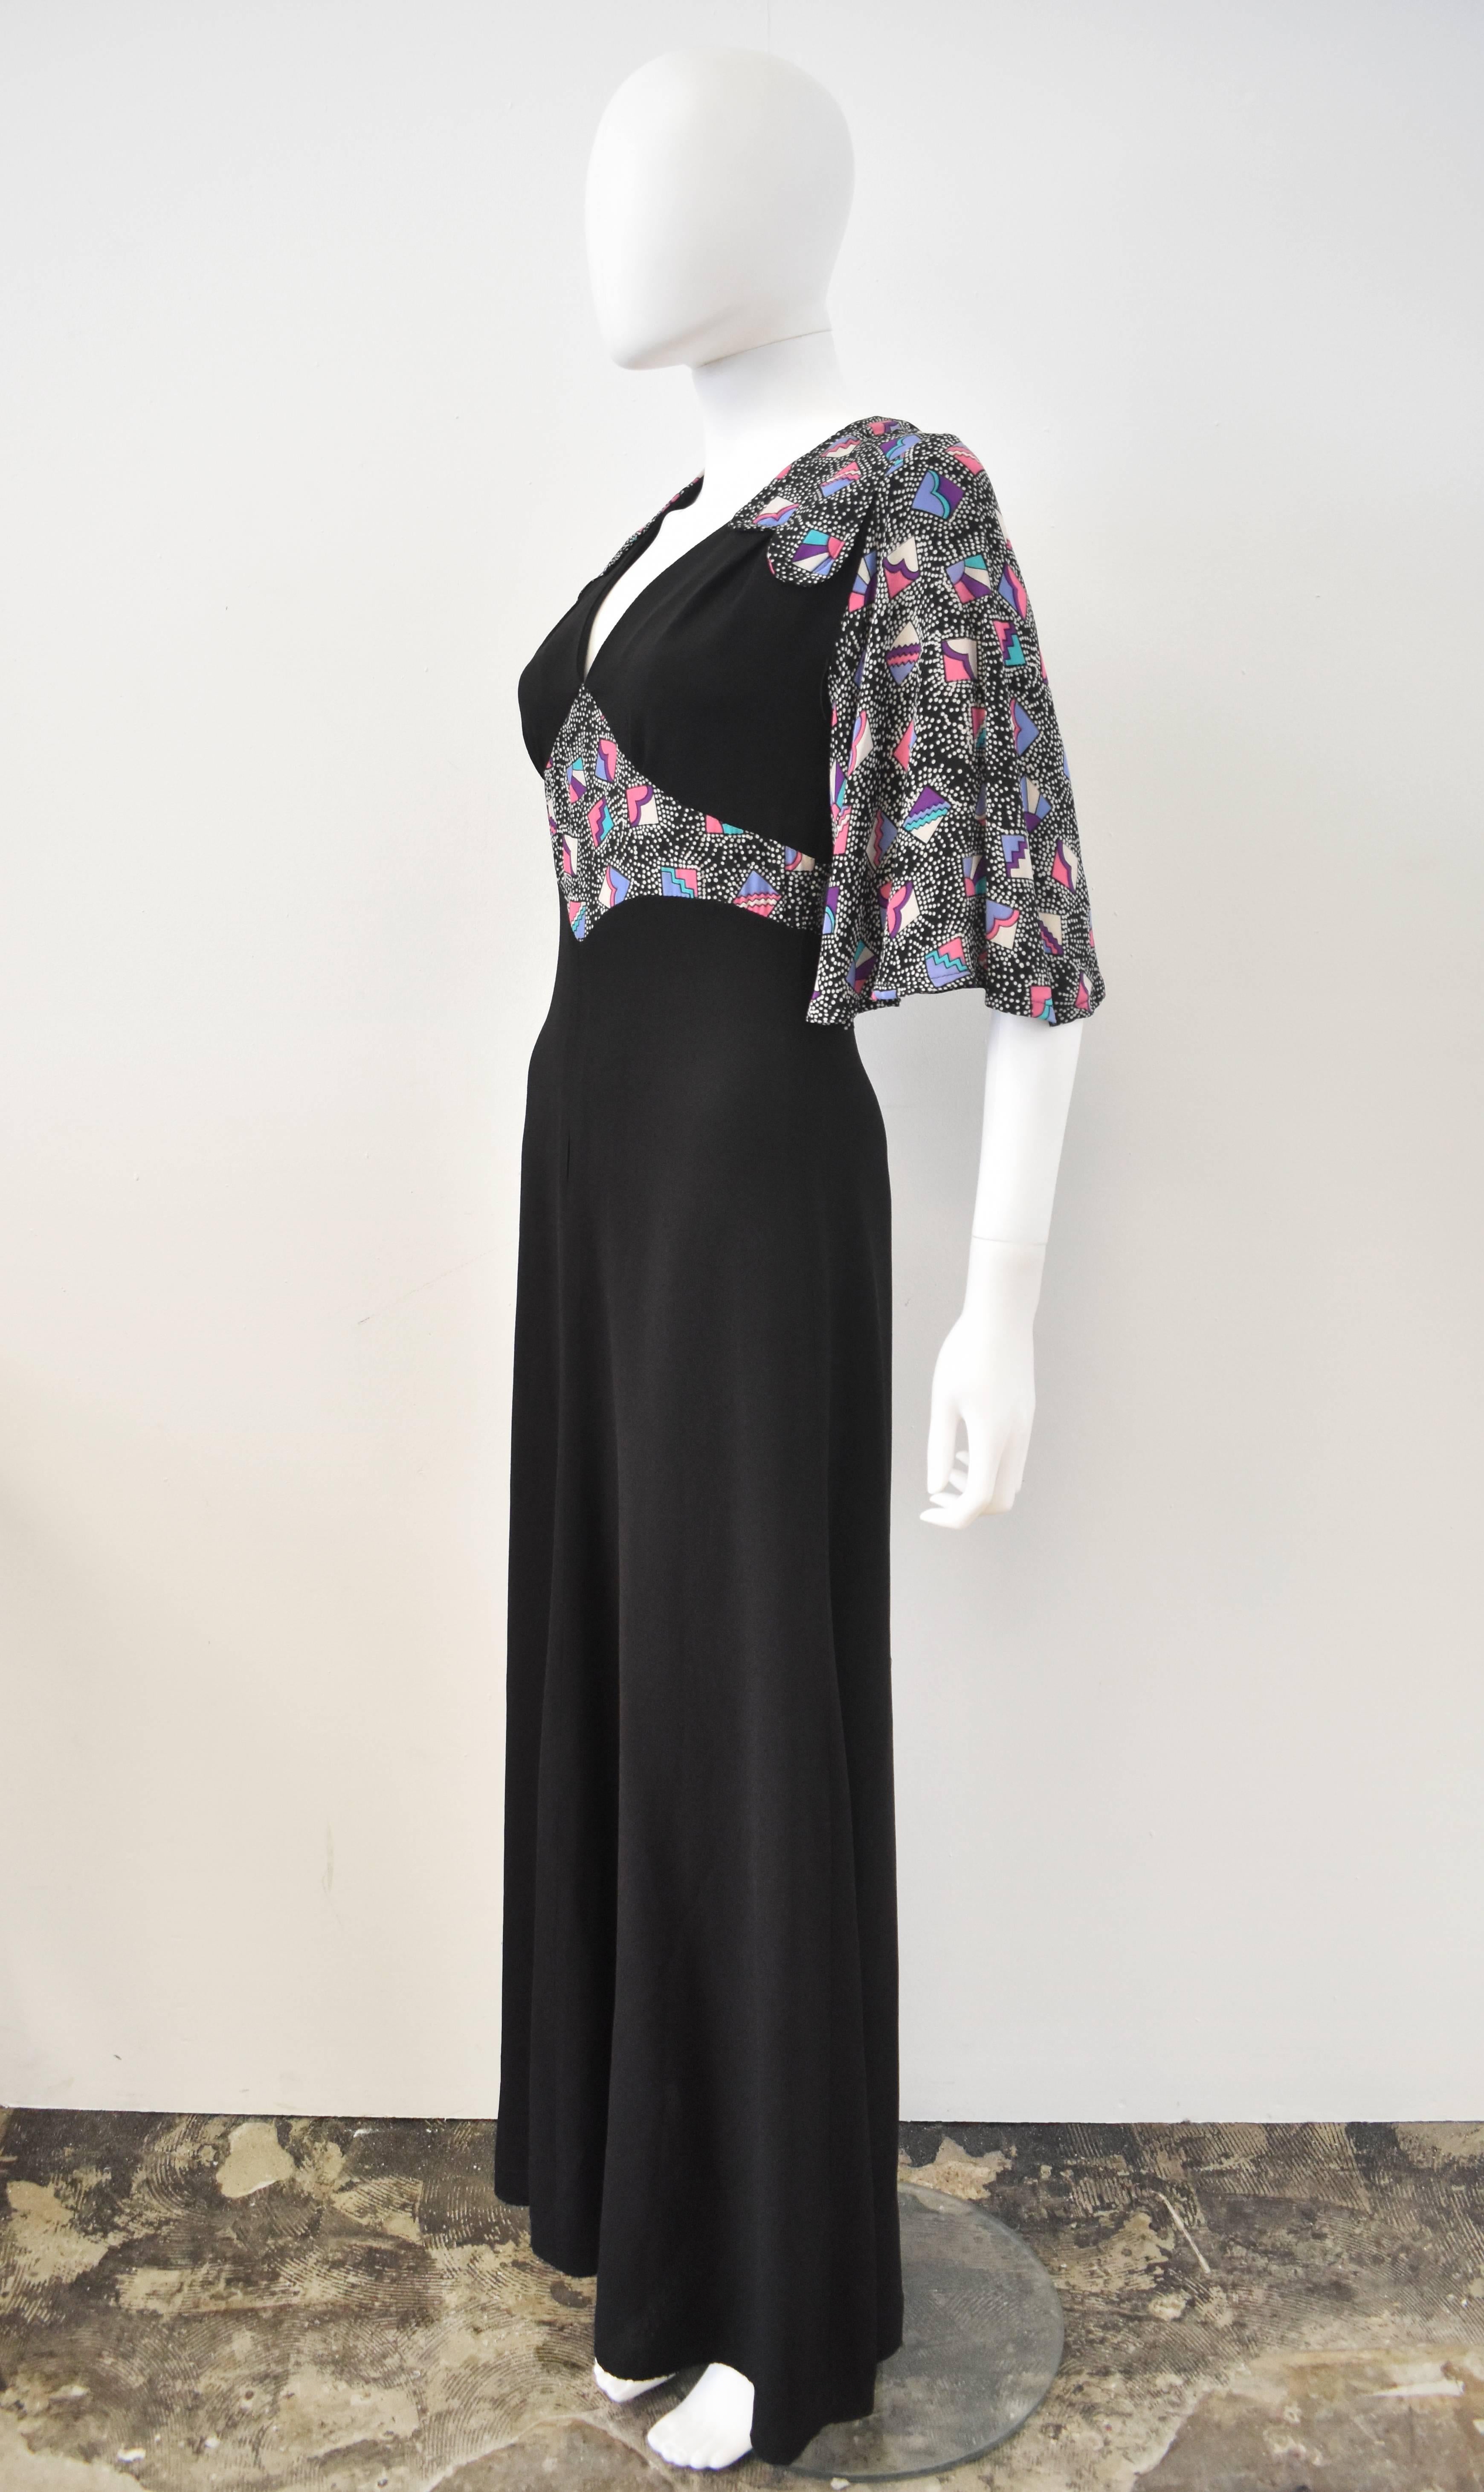 From the iconic London boutique Bus Stop which opened in 1968. A long black crepe dress with flared mid-length sleeves and abstract motifs along the waist and shoulders. The cut is reminiscent of the 1970s, while the colorful abstract motifs hint to